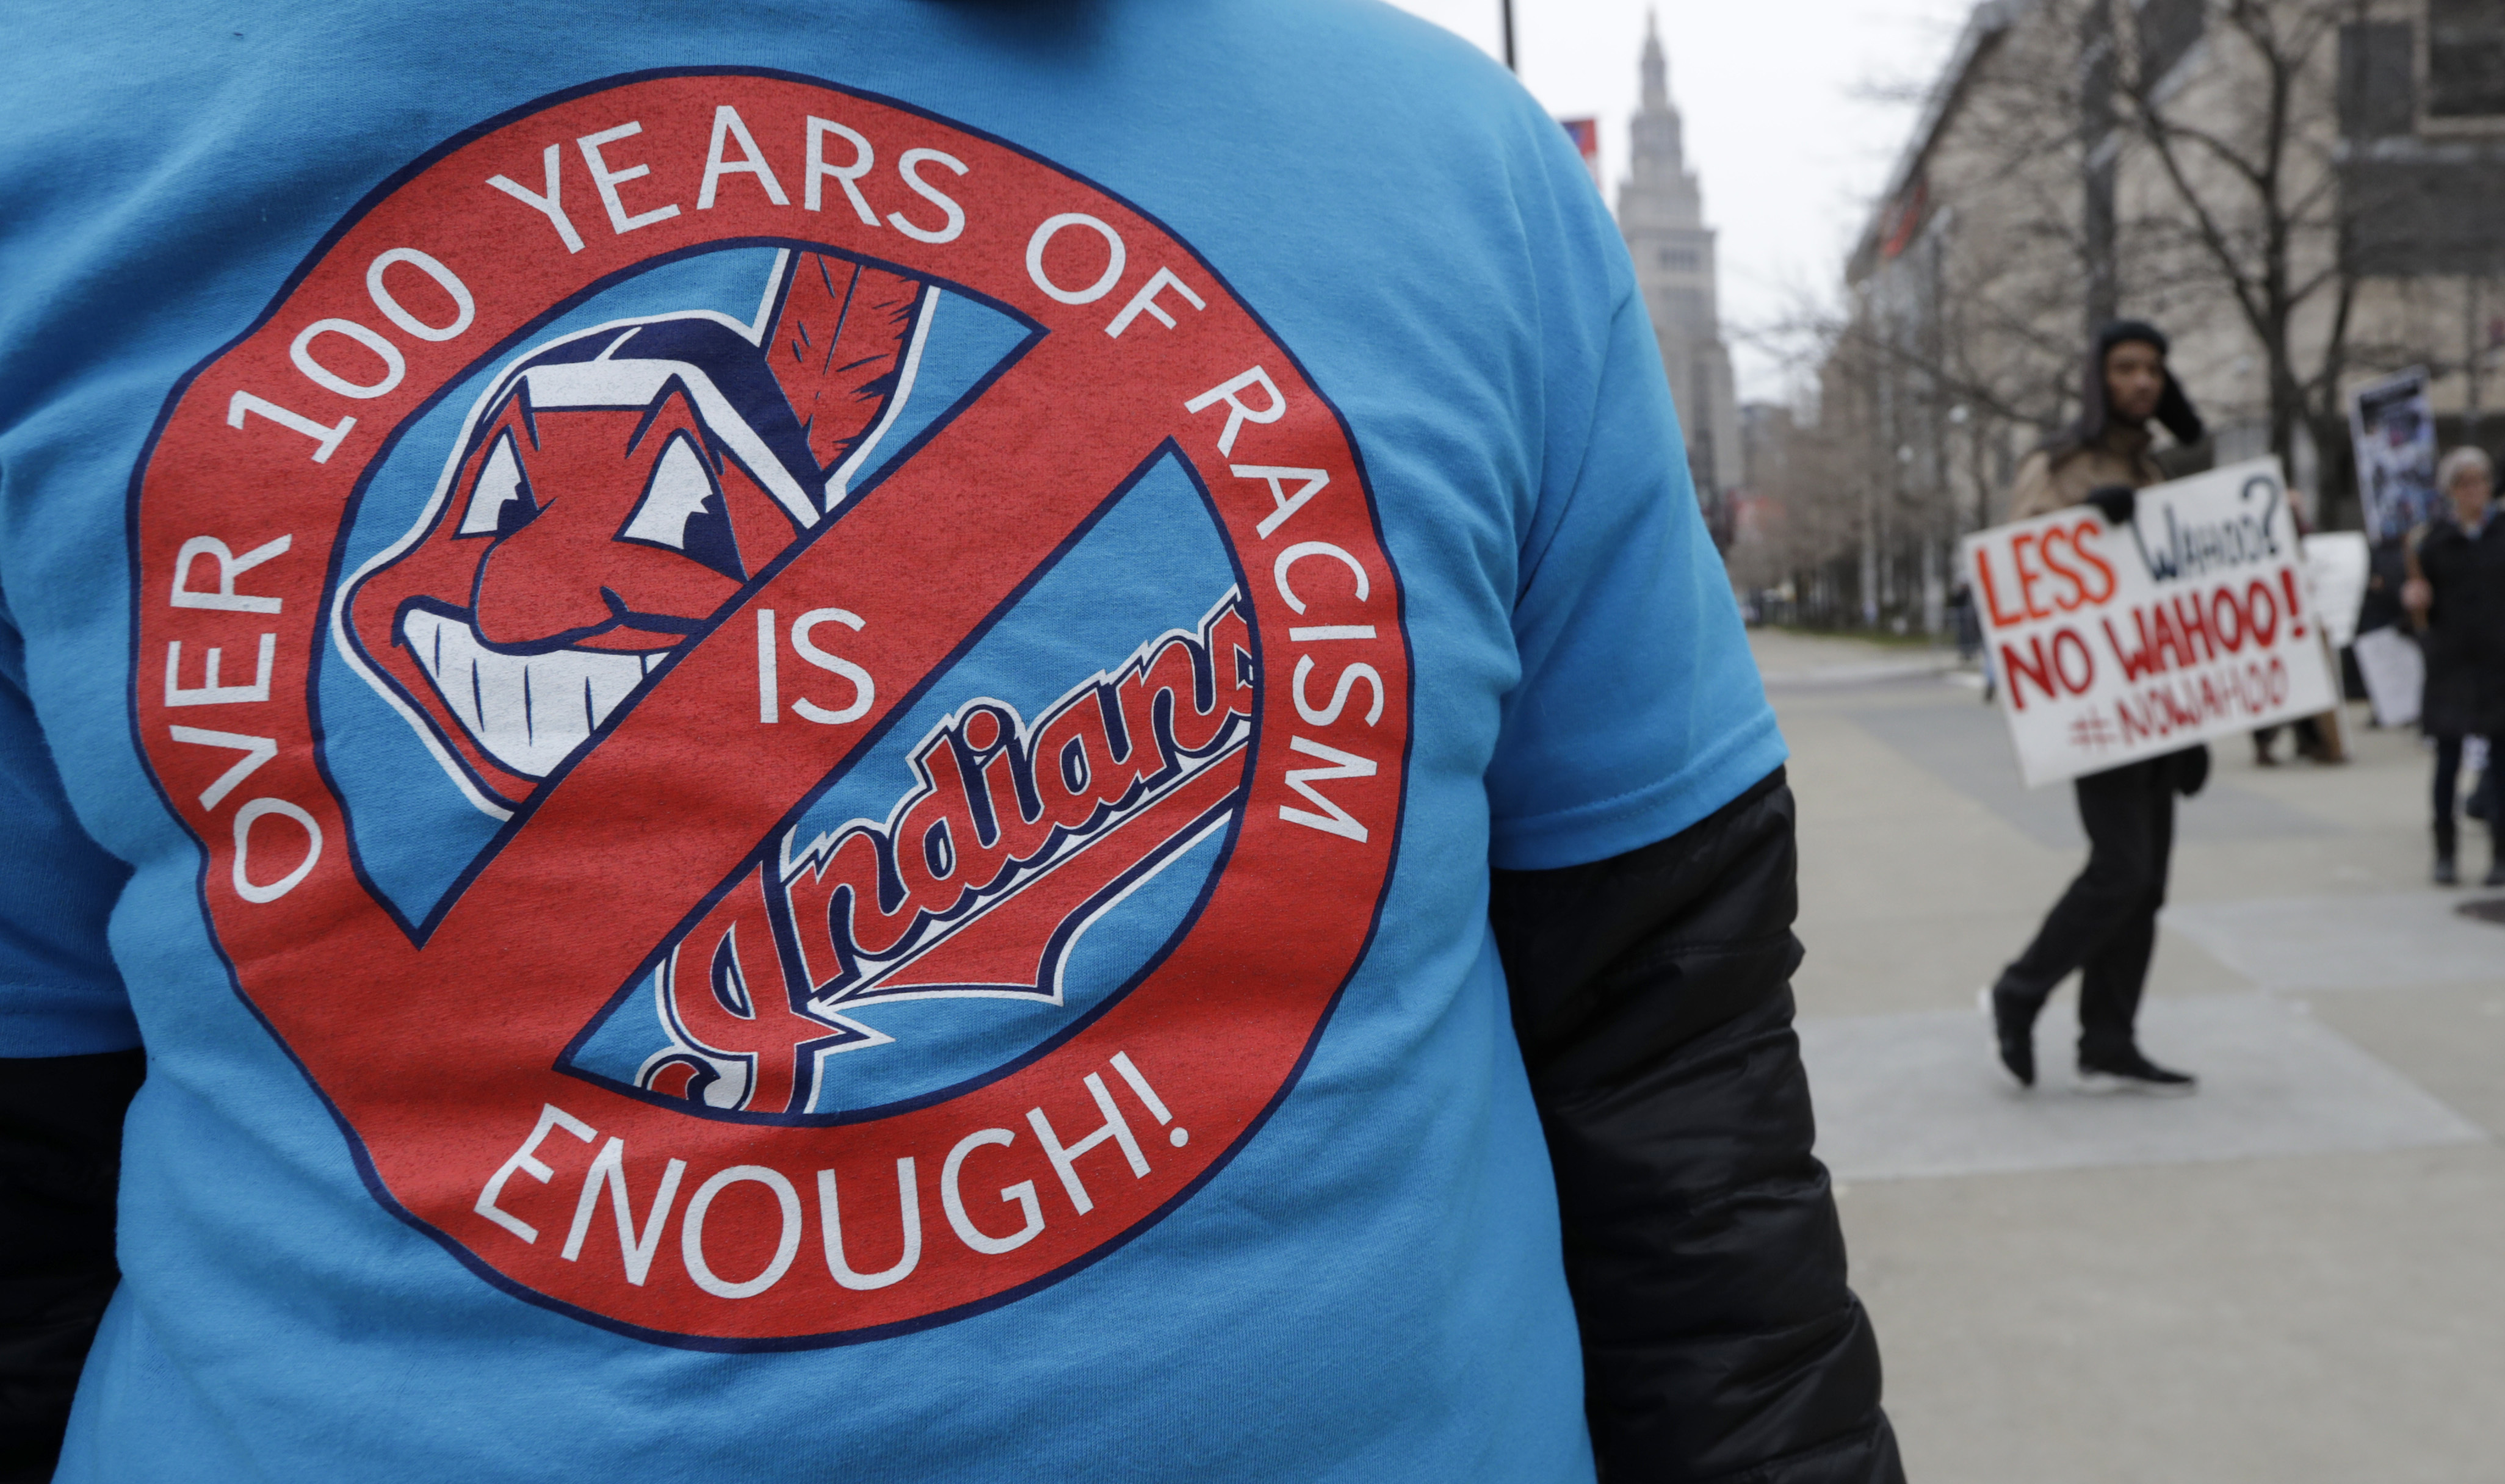 Coming to terms with Chief Wahoo, the Indians and history